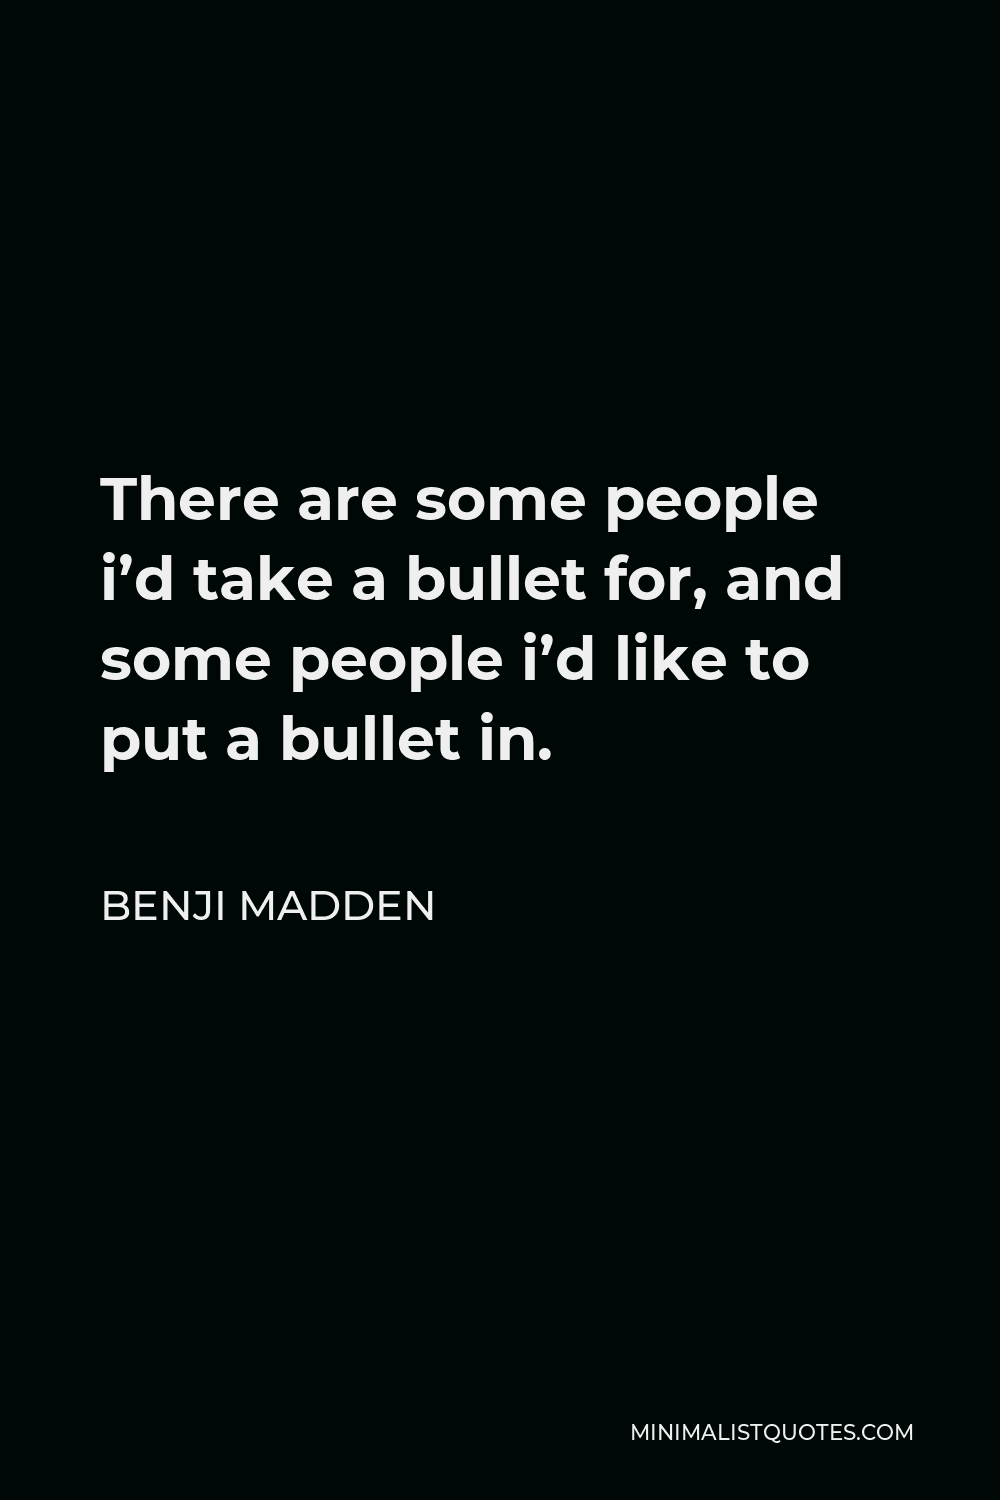 Benji Madden Quote - There are some people i’d take a bullet for, and some people i’d like to put a bullet in.